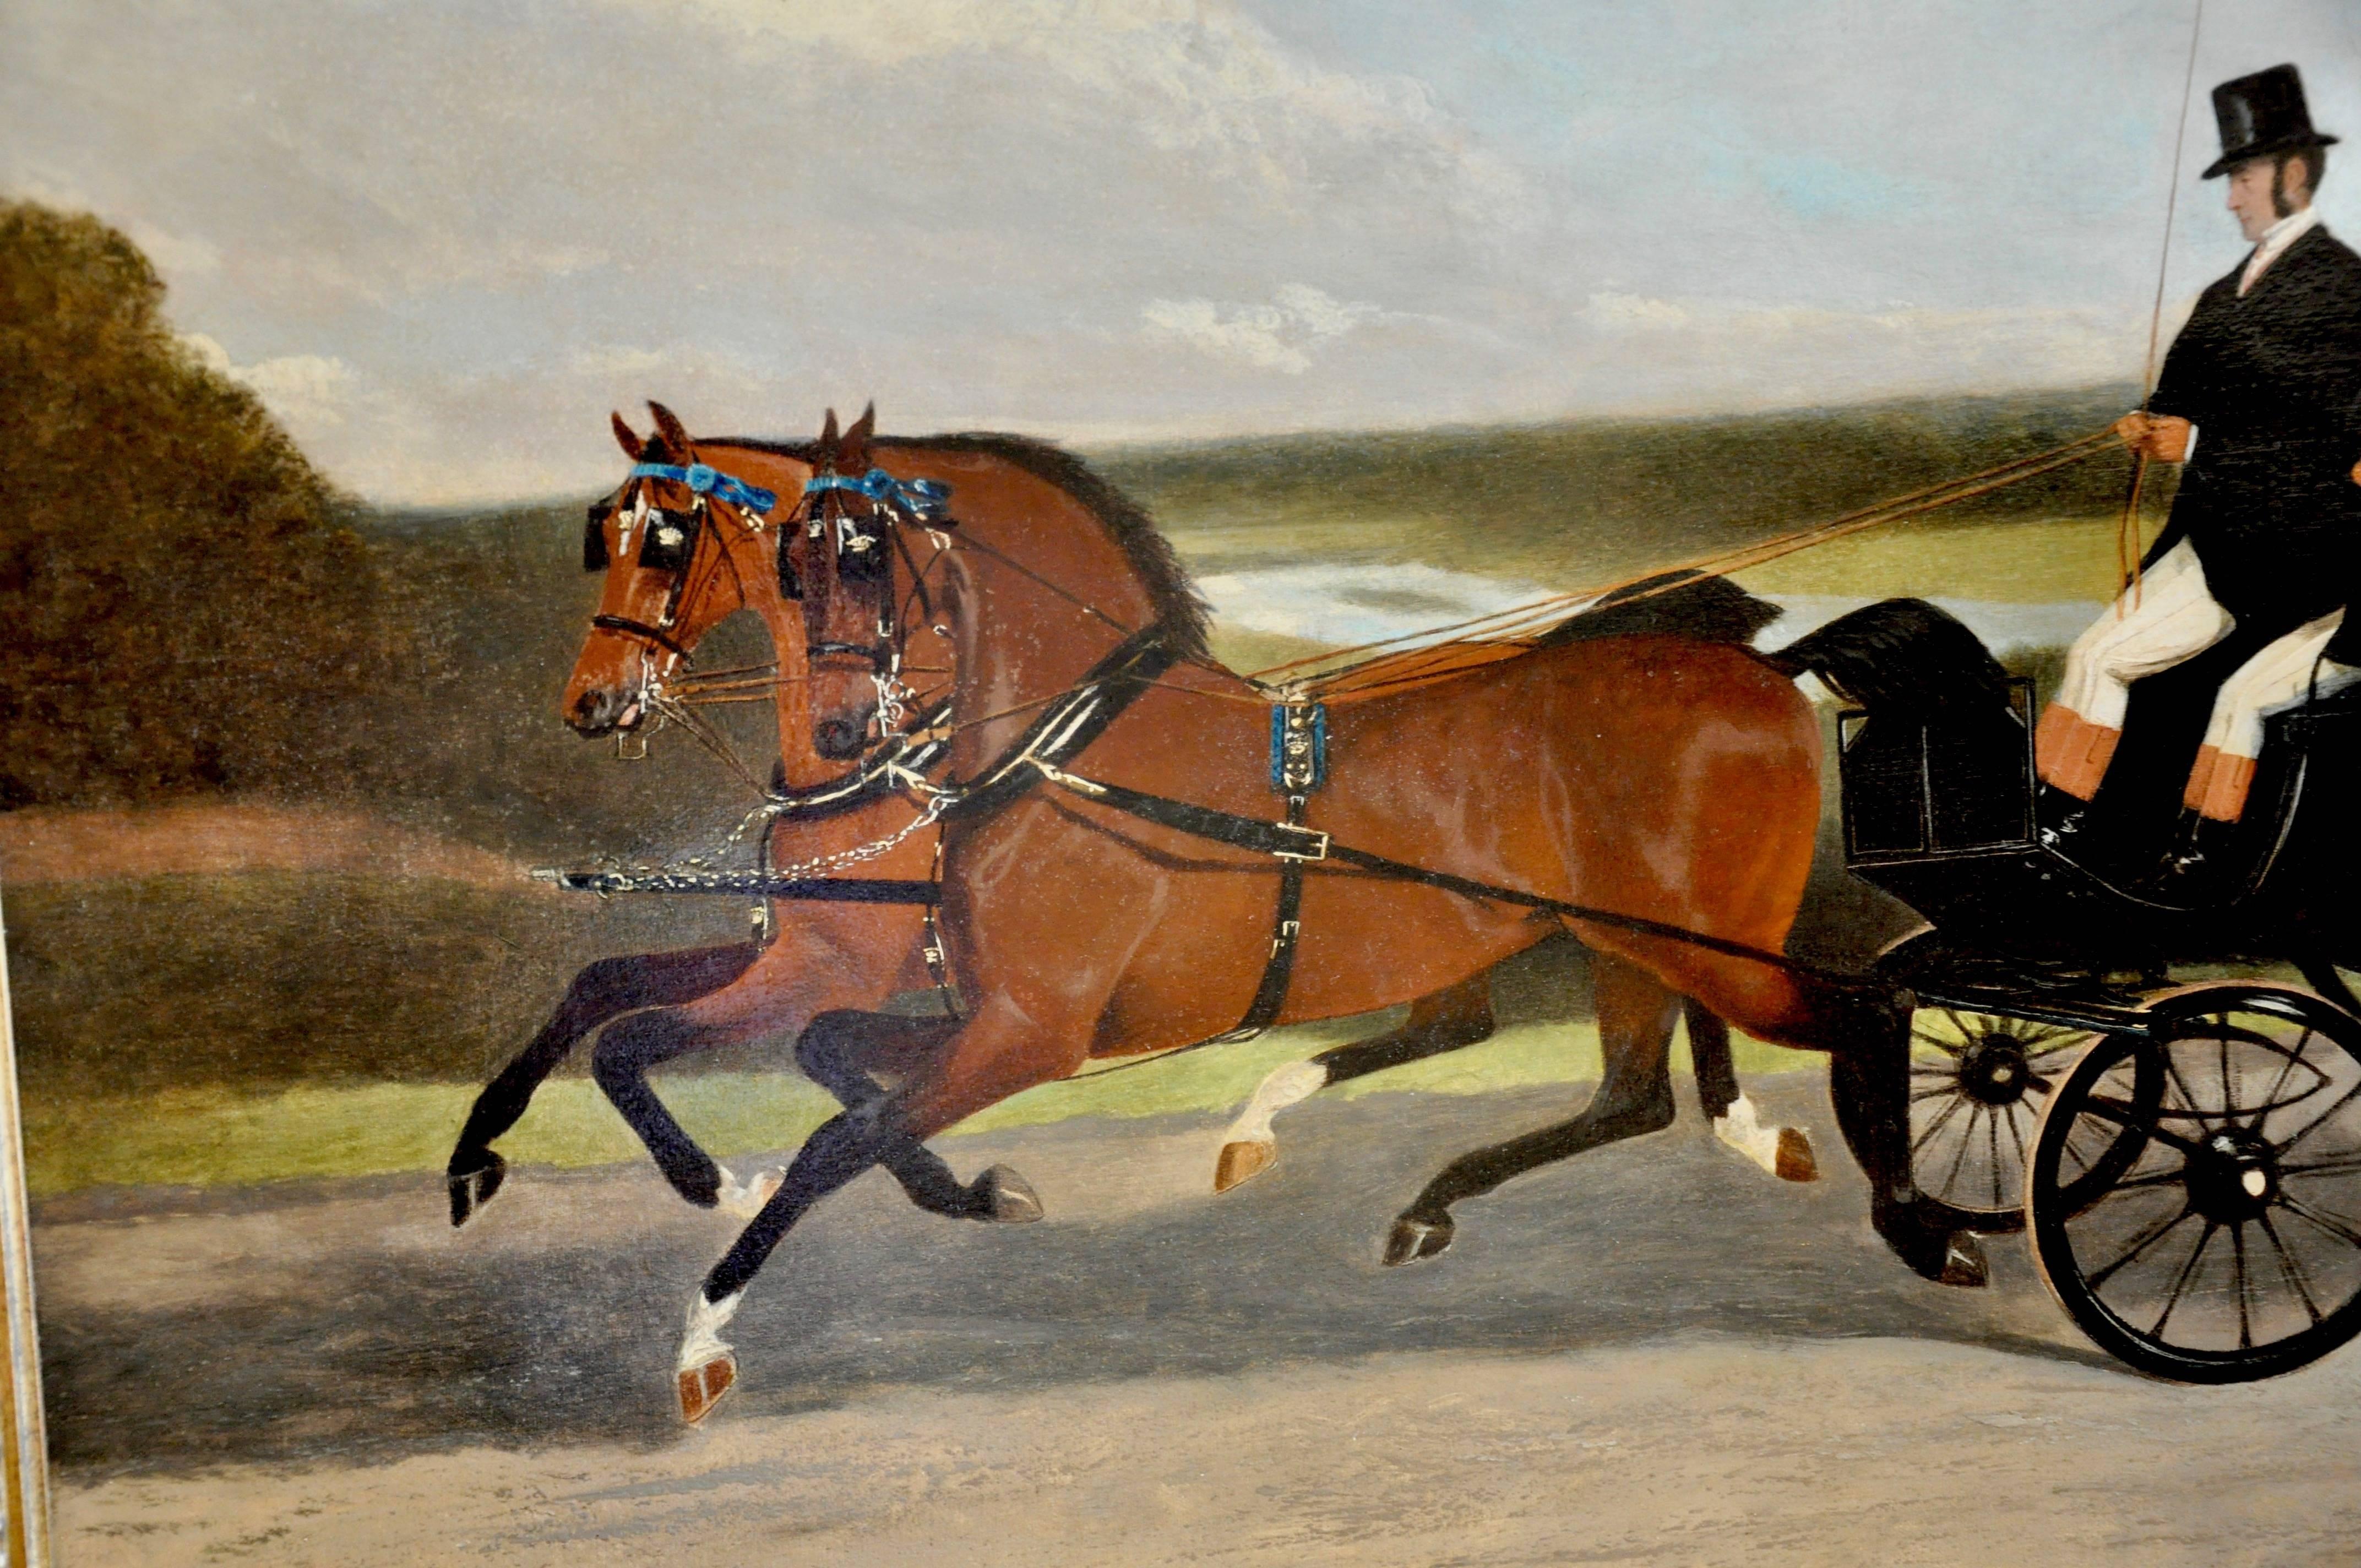 Painted Pair of 19th Century English or American Horse and Equestrian Coaching Scenes